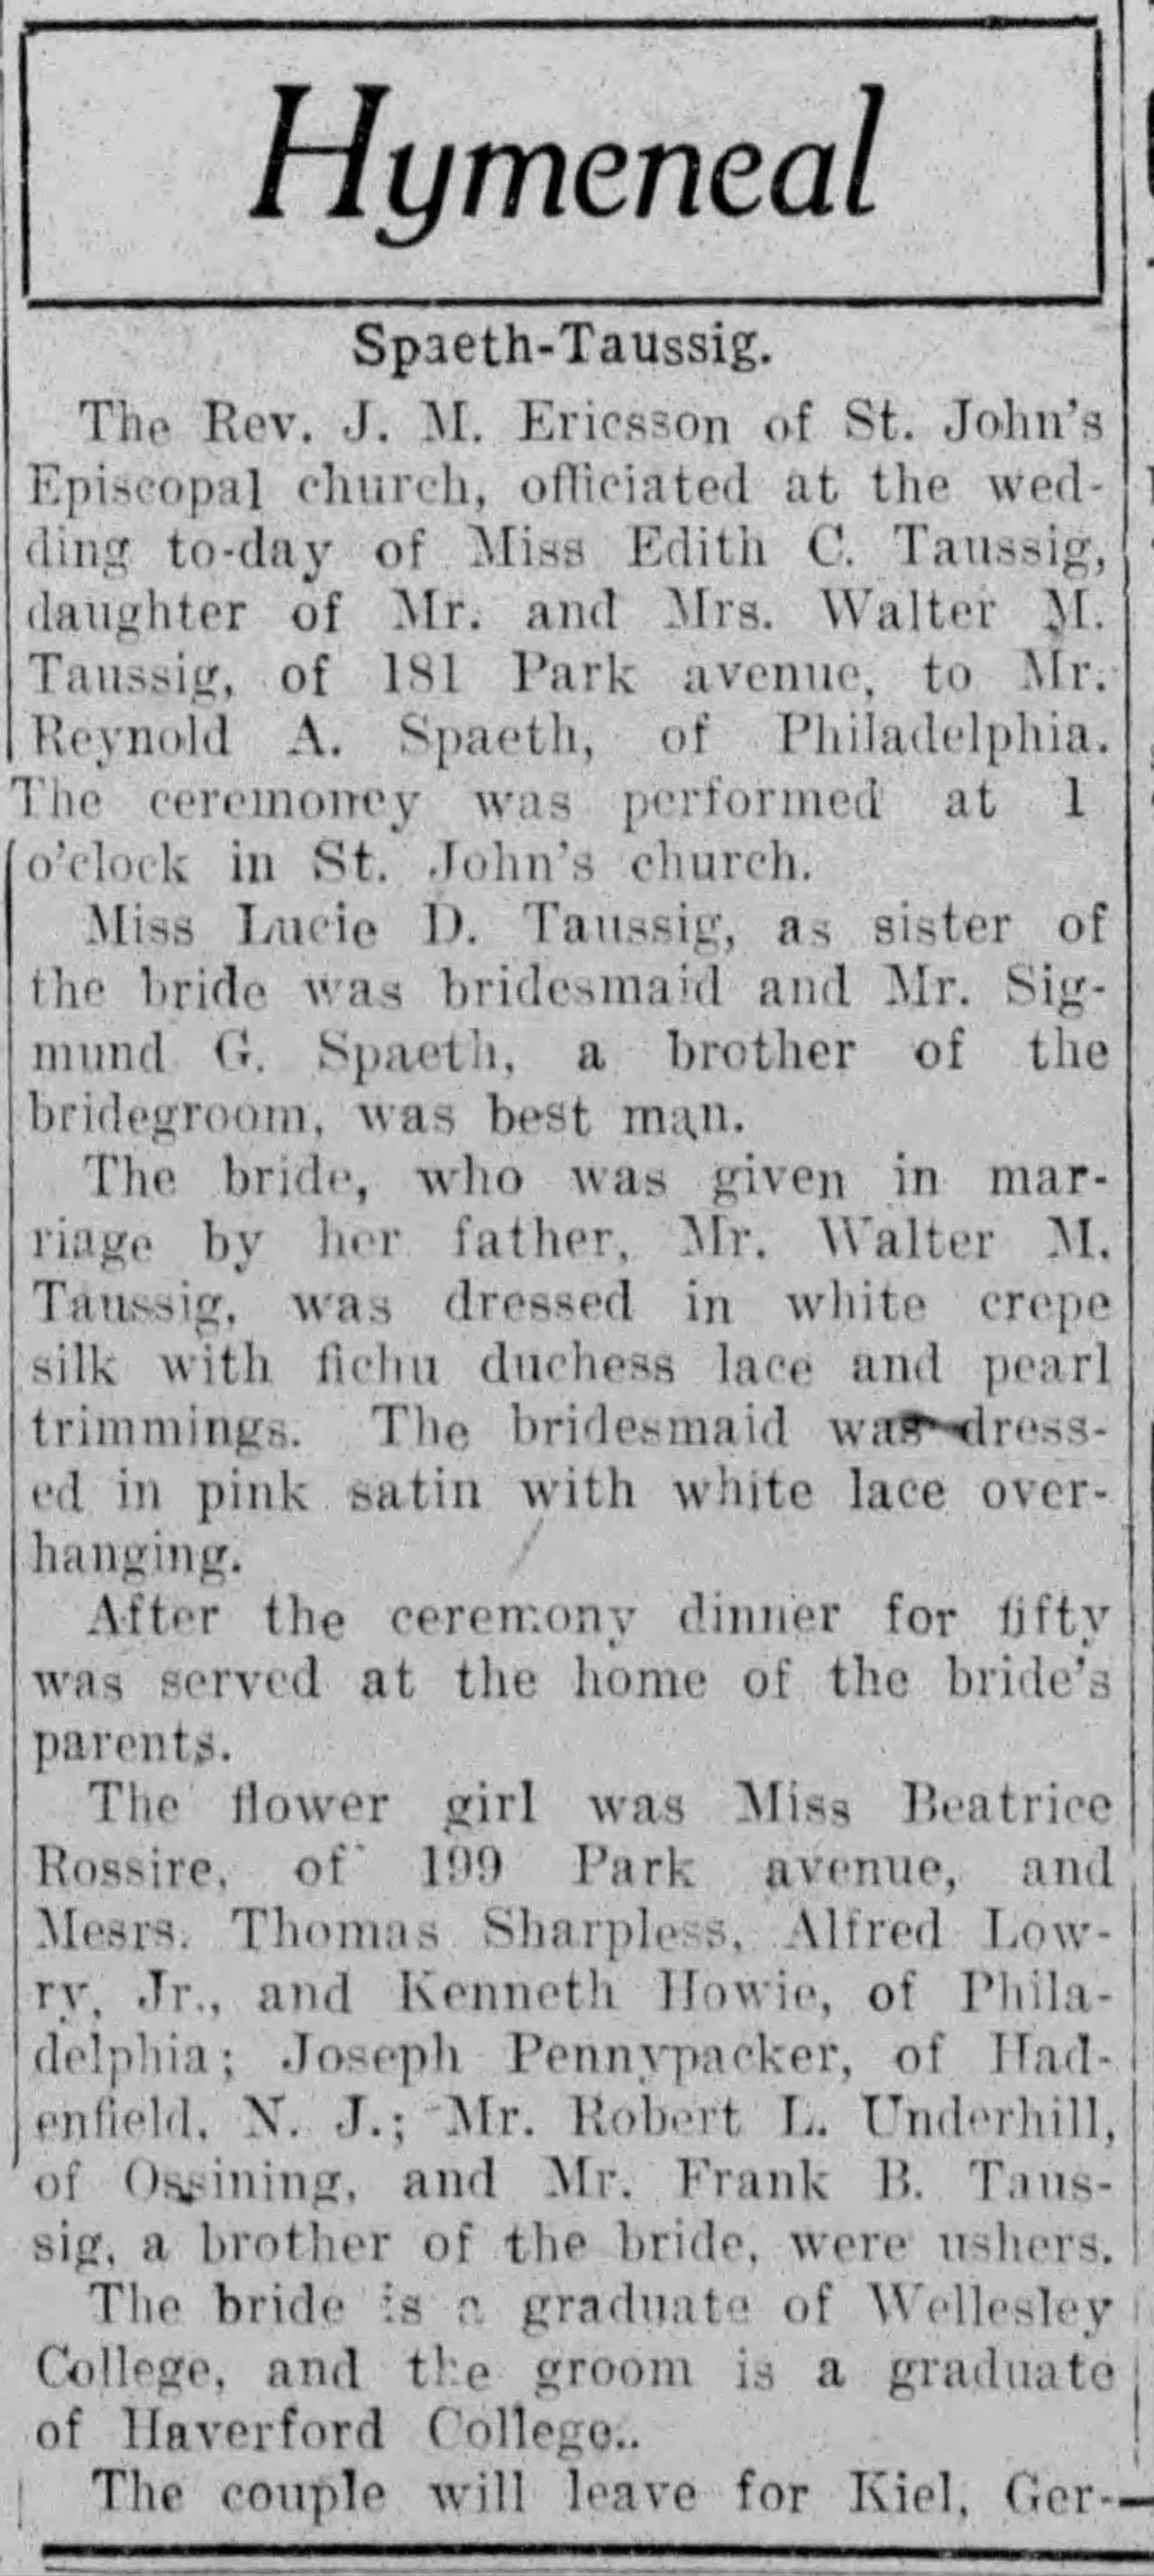 A clue in this wedding announcement of Reynold Albrecht Spaeth and Edith E. Taussaig from The Yonkers Herald Statesman August 18, 1913 edition provided a clue to who "R" might be. (Source: Newspapers.com)